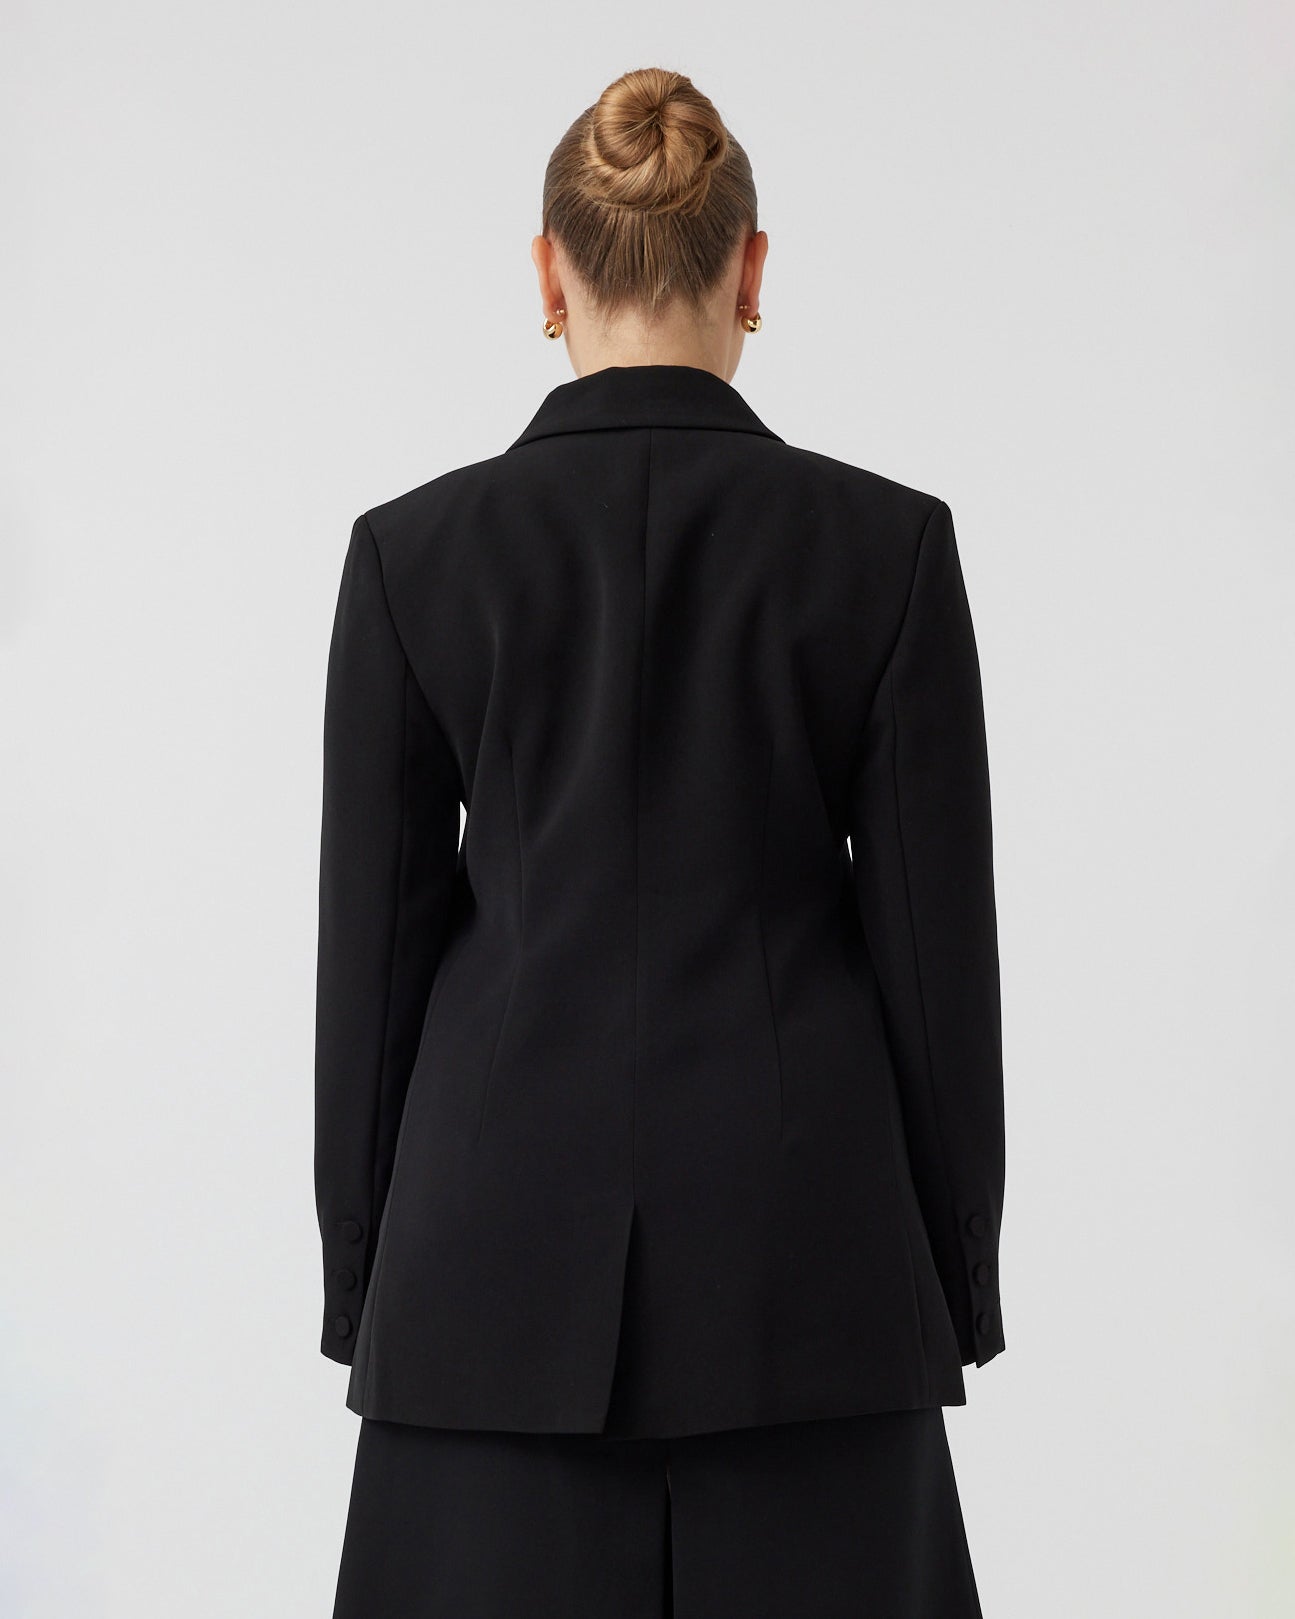 Youthful woman with pulled back dark blonde hair, with a curvaceous figure, photographed from the back wearing tailored black blazer 